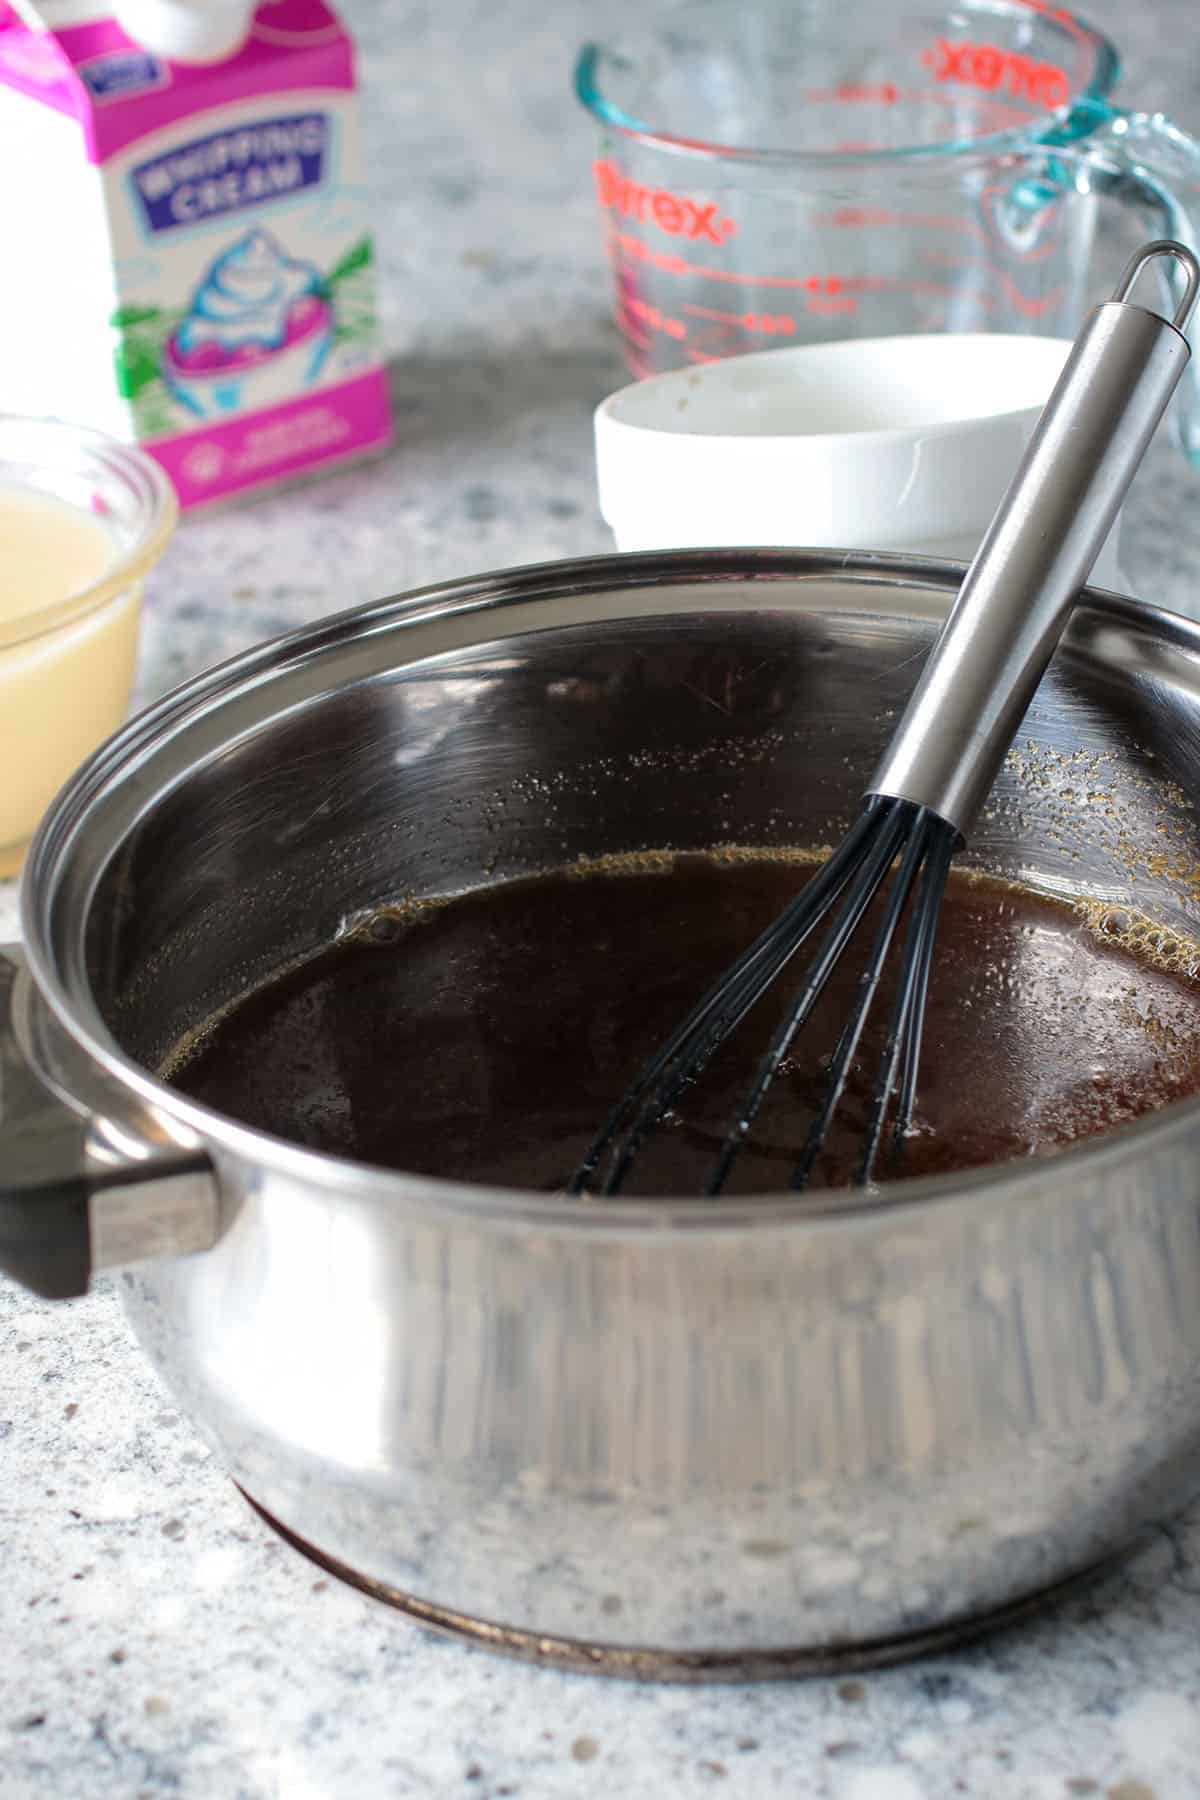 Dissolving the gelatin powders, sugar and coffee in a saucepan with water.